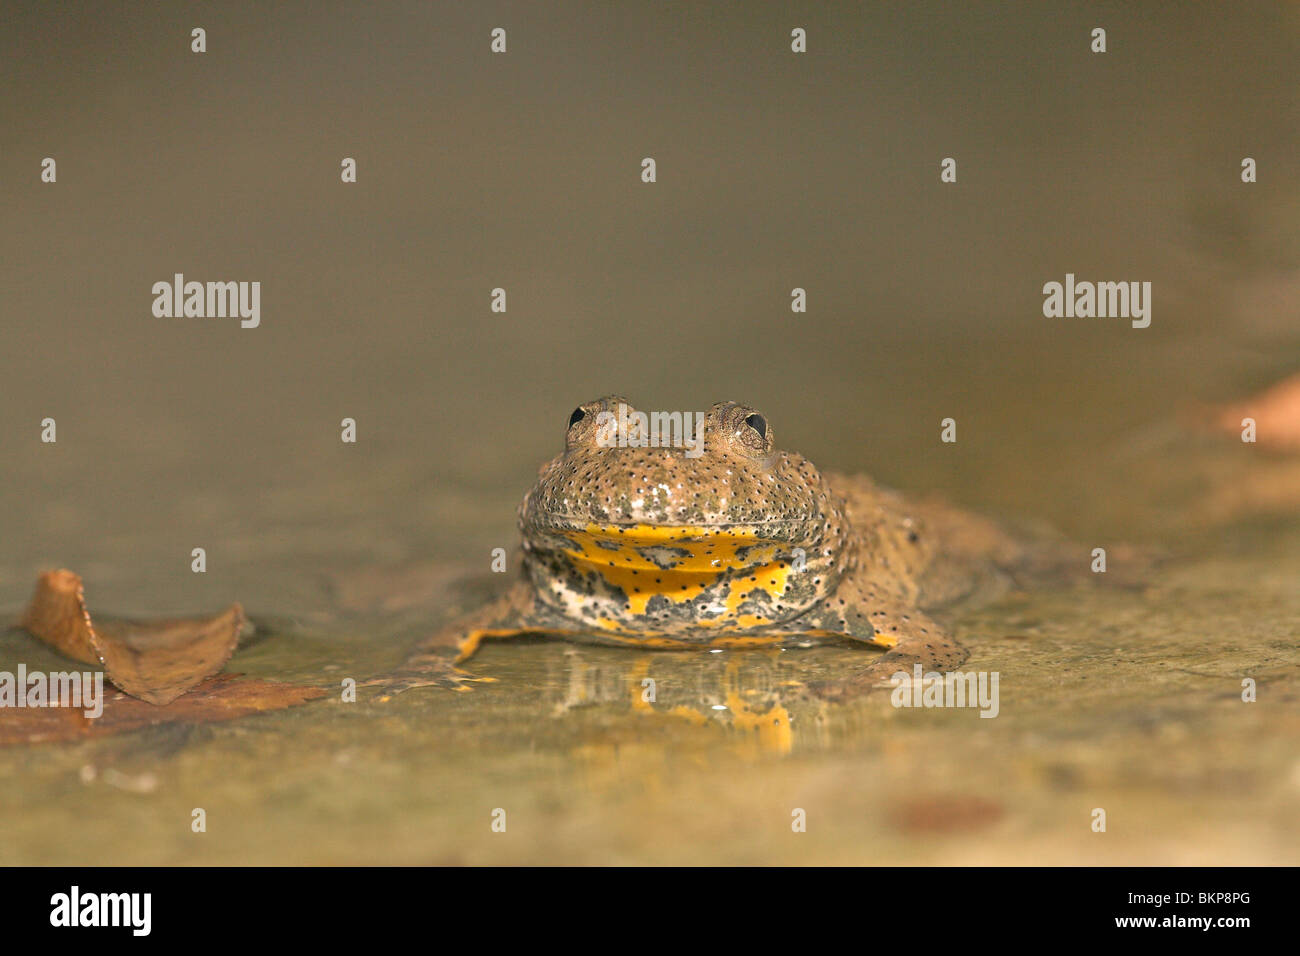 photo of a yellow-bellied toad in an shallow rock pool Stock Photo